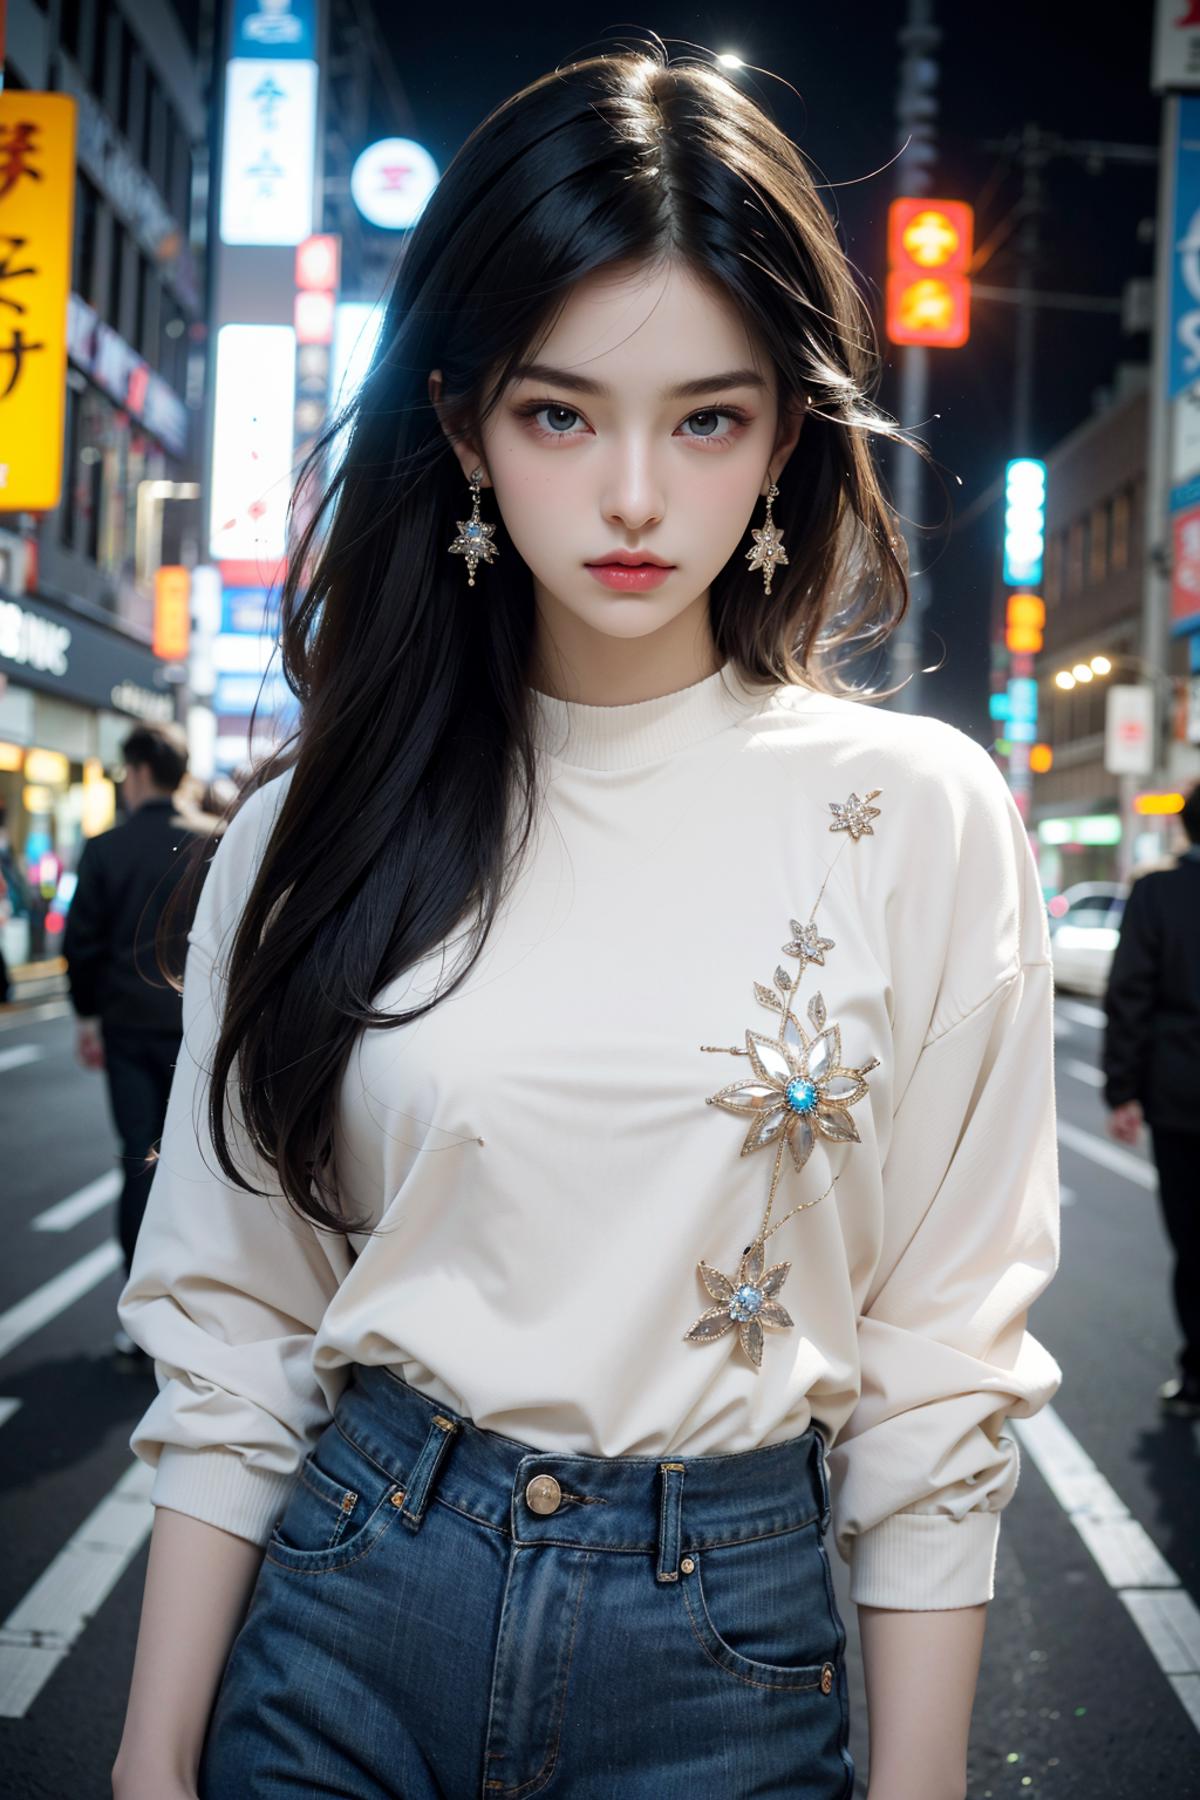 A pretty young woman in a white shirt with a flower design and earrings.